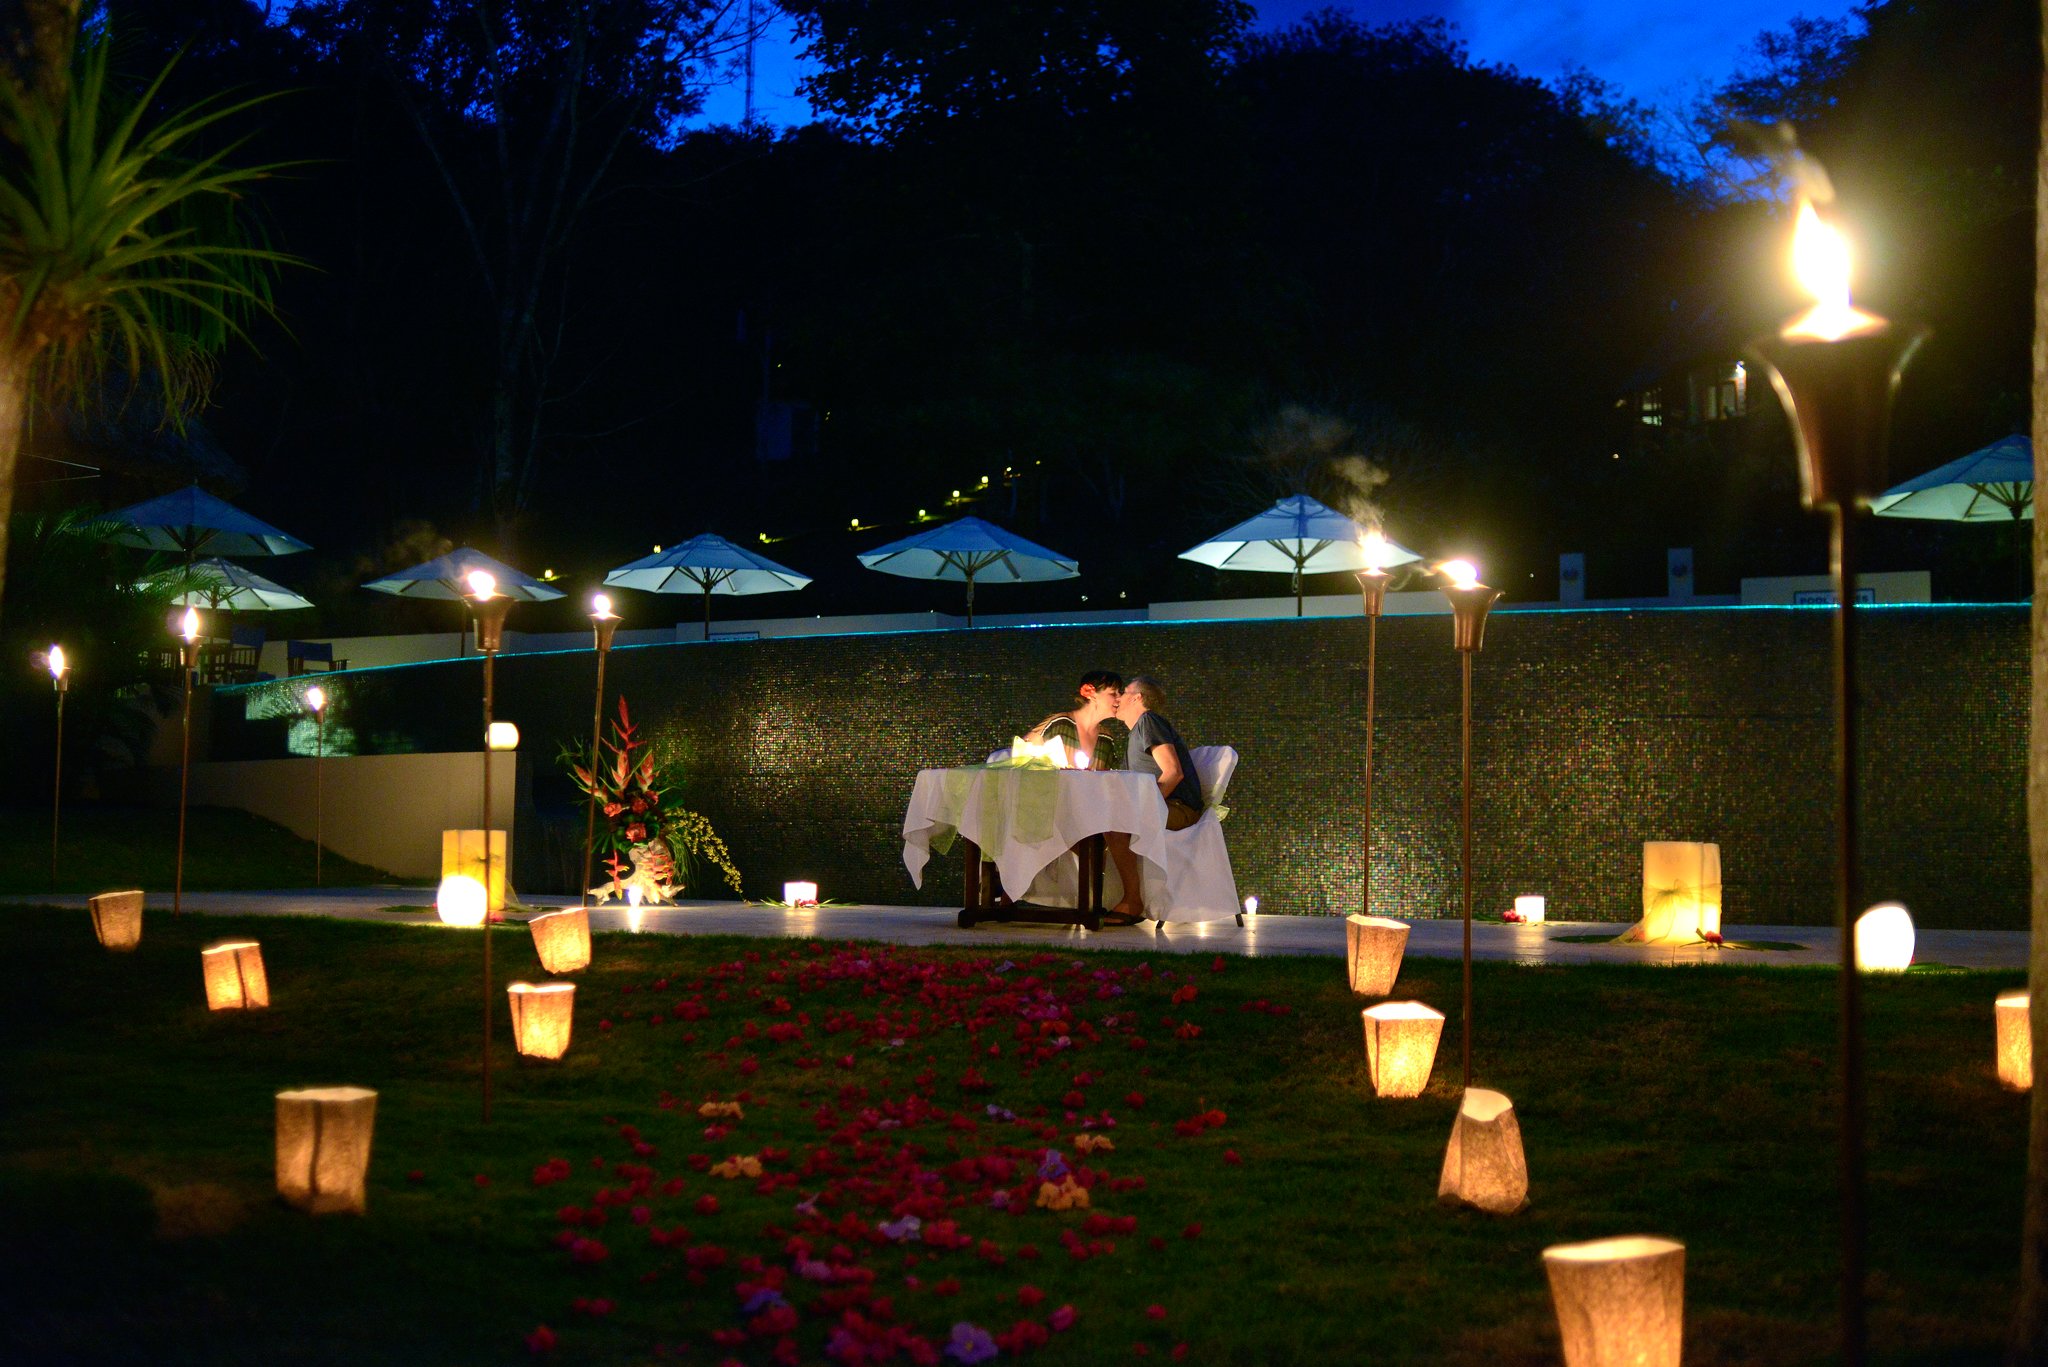 Finding ways to spice up your romantic life? Try a Belize Adventure & Romance Valentine package!